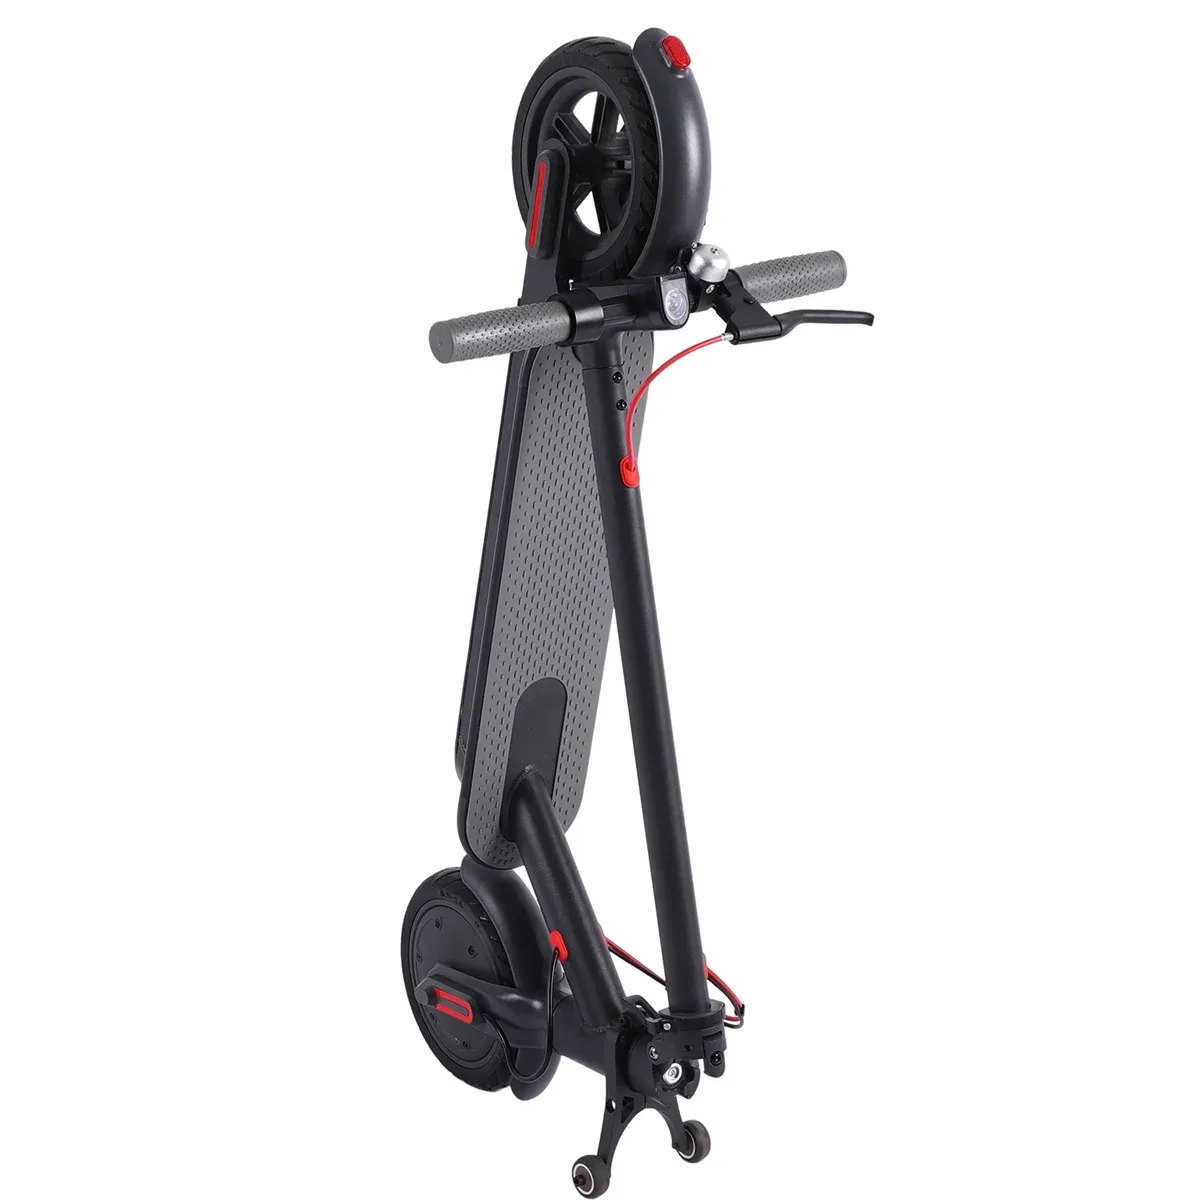 Board Folding Electric Scooter Handstand Stand for Xiaomi Es MAX G30 Scooter Universal Folding Storage Bracket Accessories